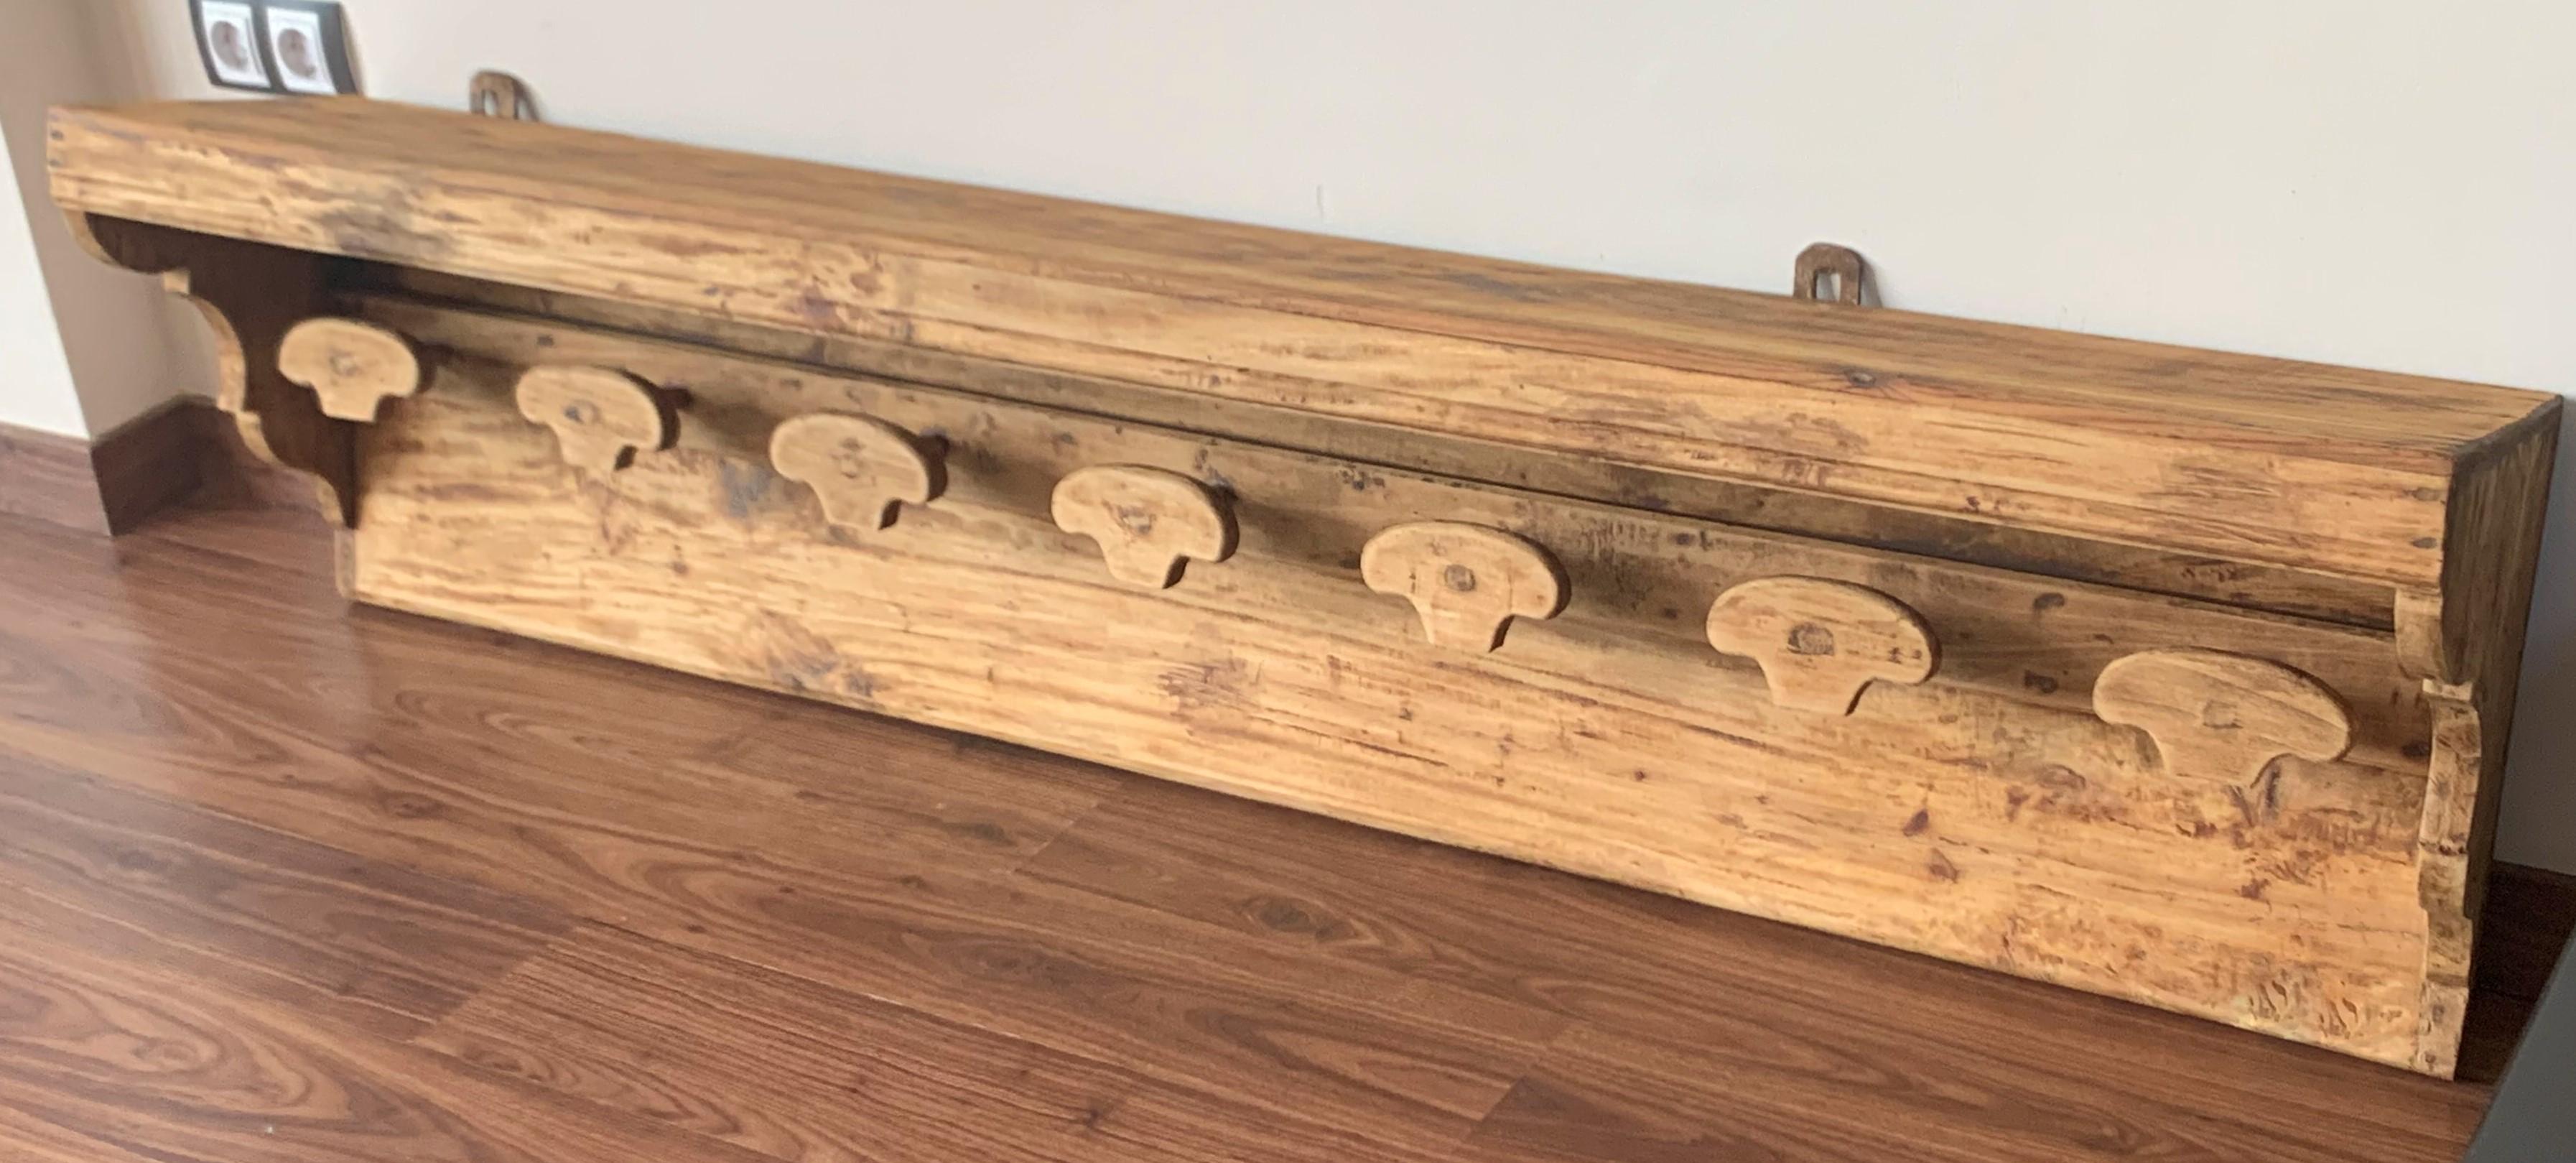 We present you a solid oak coat rack with big hooks.
The whole is topped with an advanced cornice, which forms a shelf.

Presented item is in very good condition.